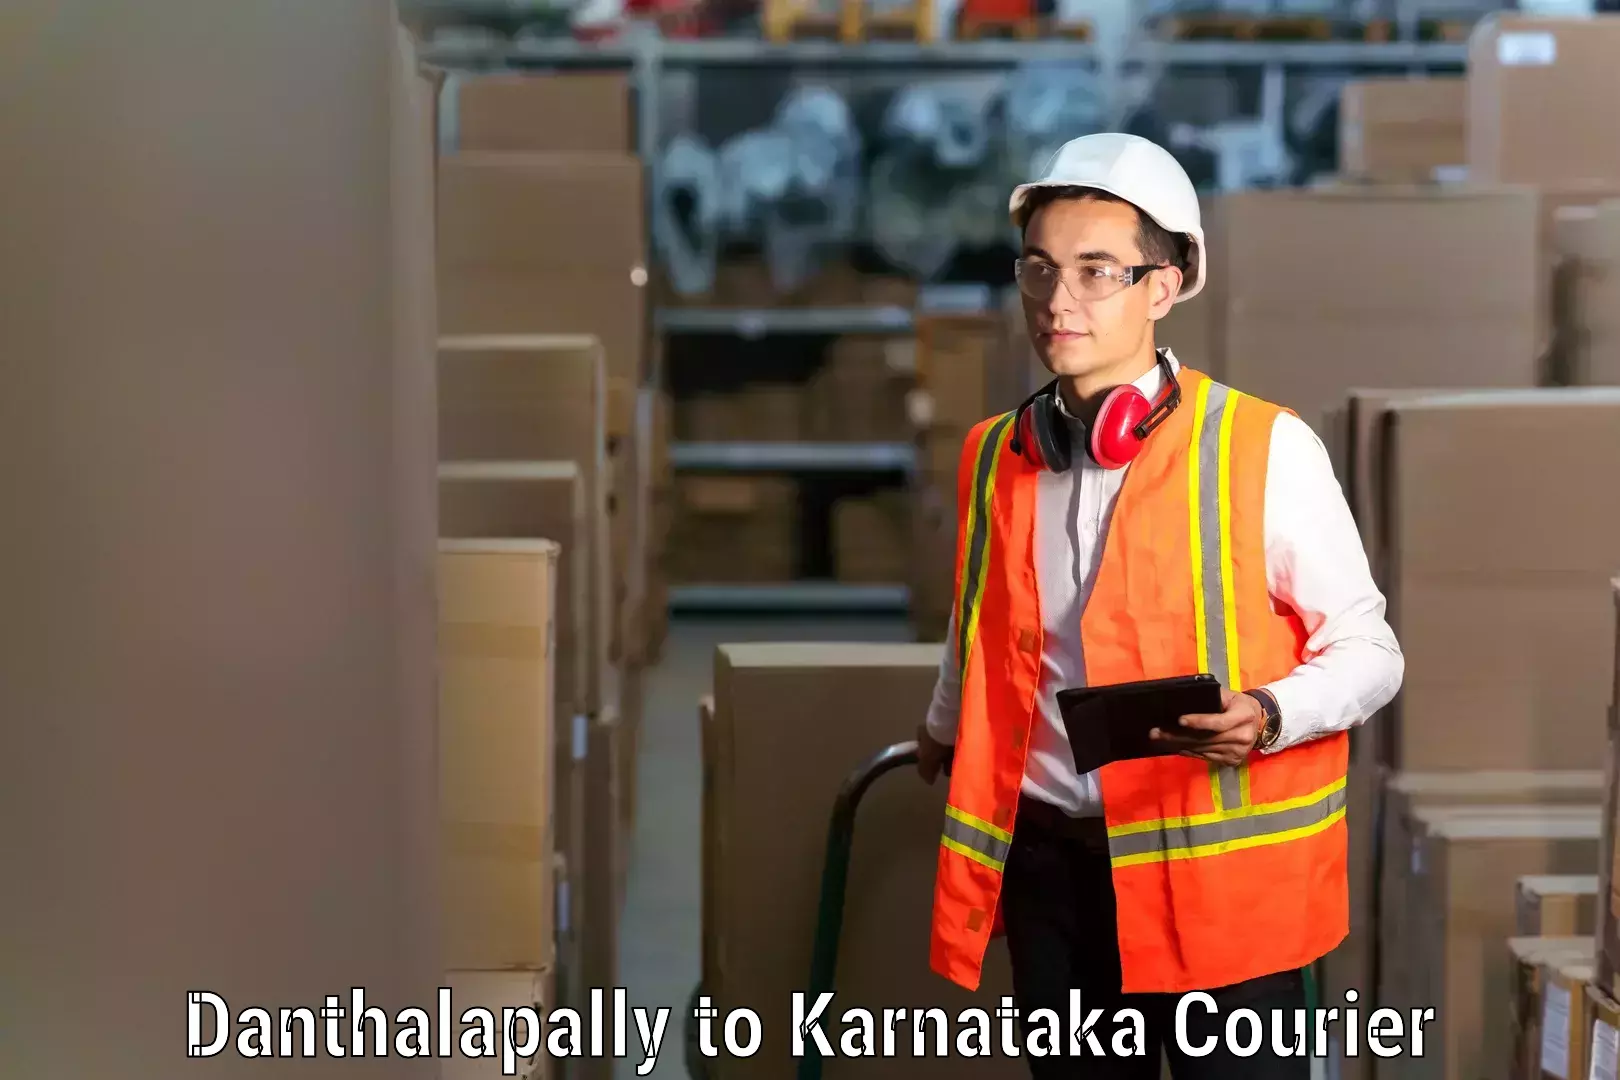 Hassle-free relocation Danthalapally to Bengaluru